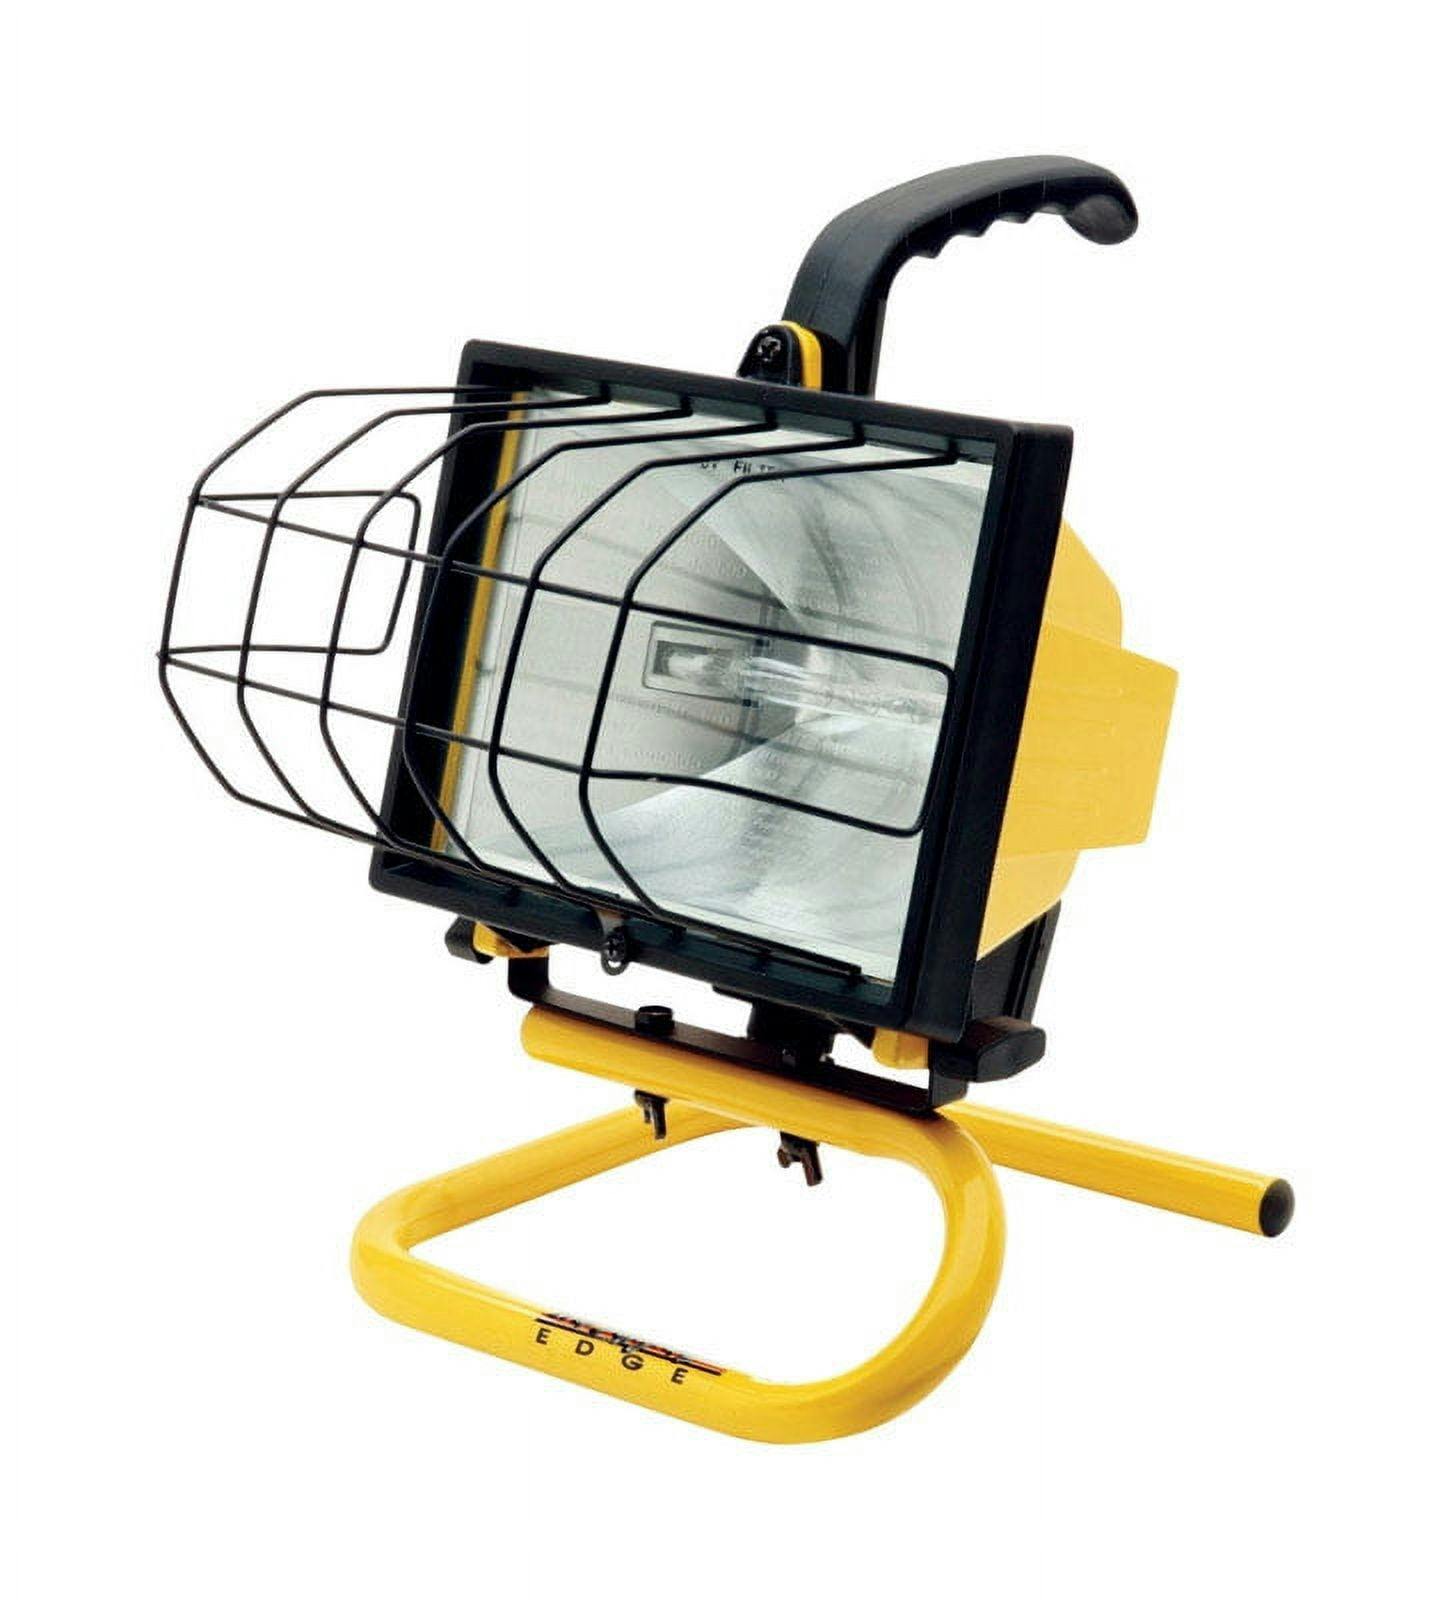 Aimable 500W Halogen Work Light with Safety Cage and Handle